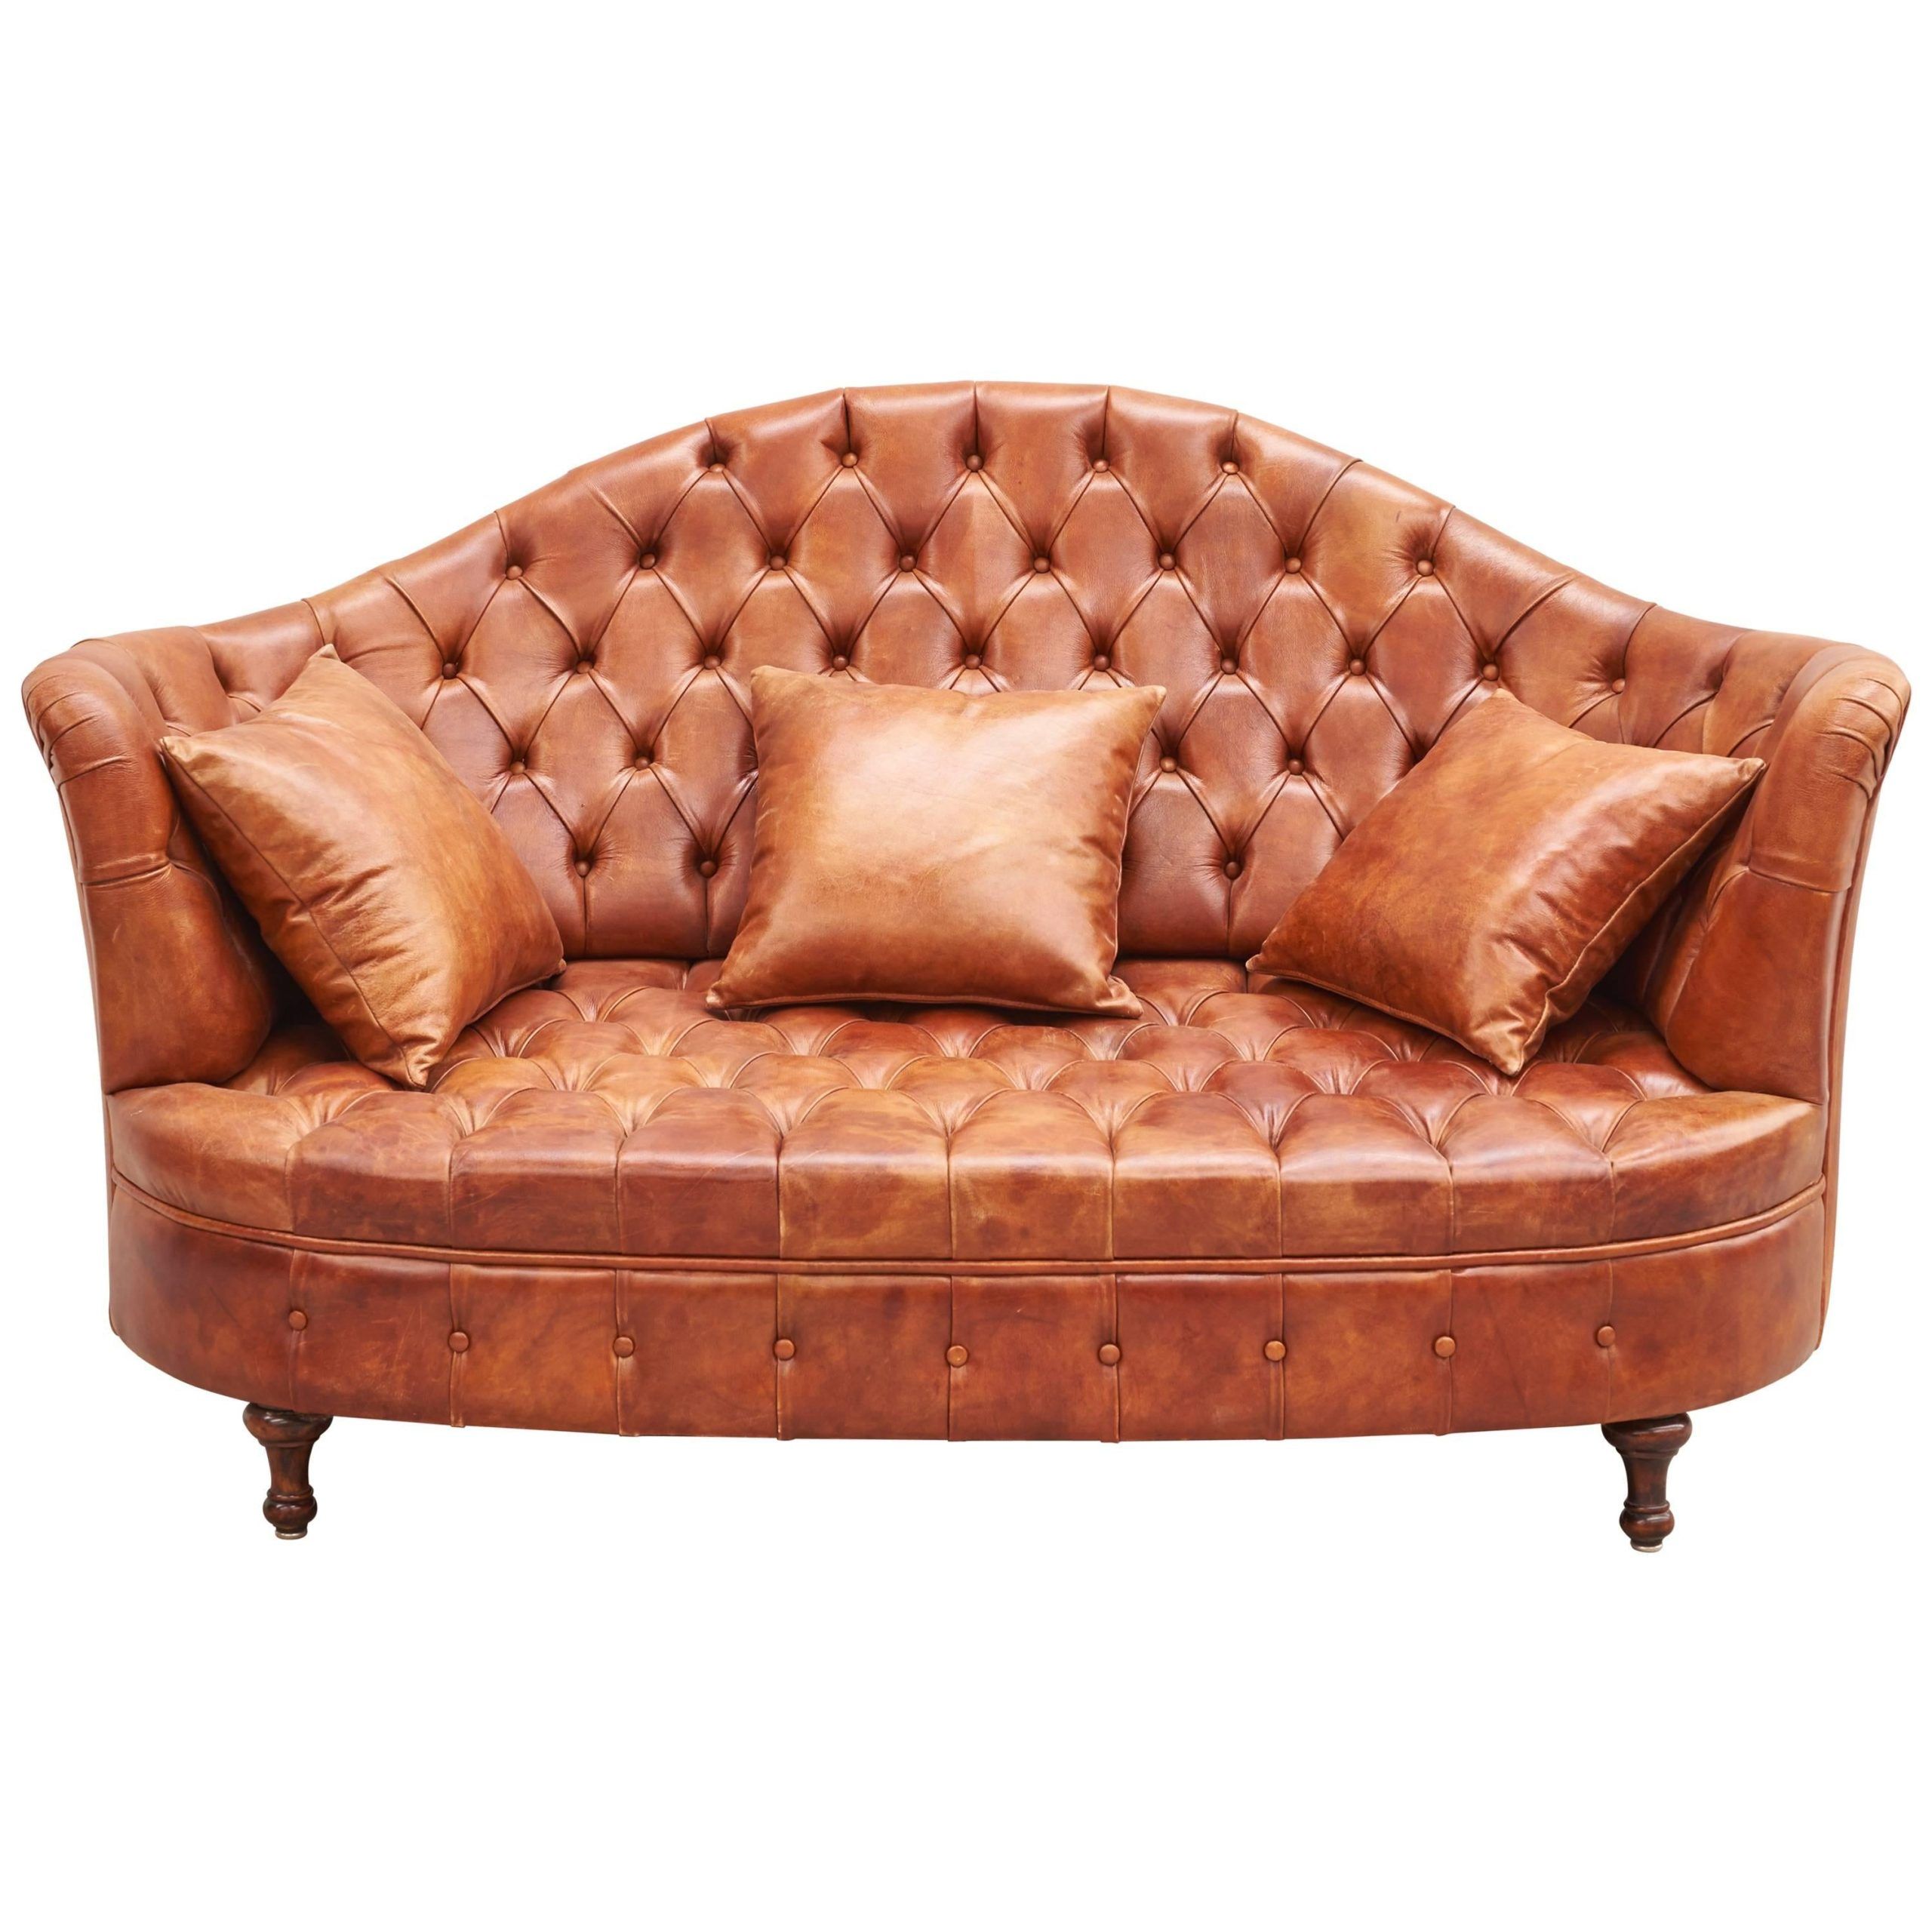 Burgundy Leather Chesterfield Sofa At 1stdibs | Burgundy Chesterfield For Chesterfield Sofas (View 11 of 21)